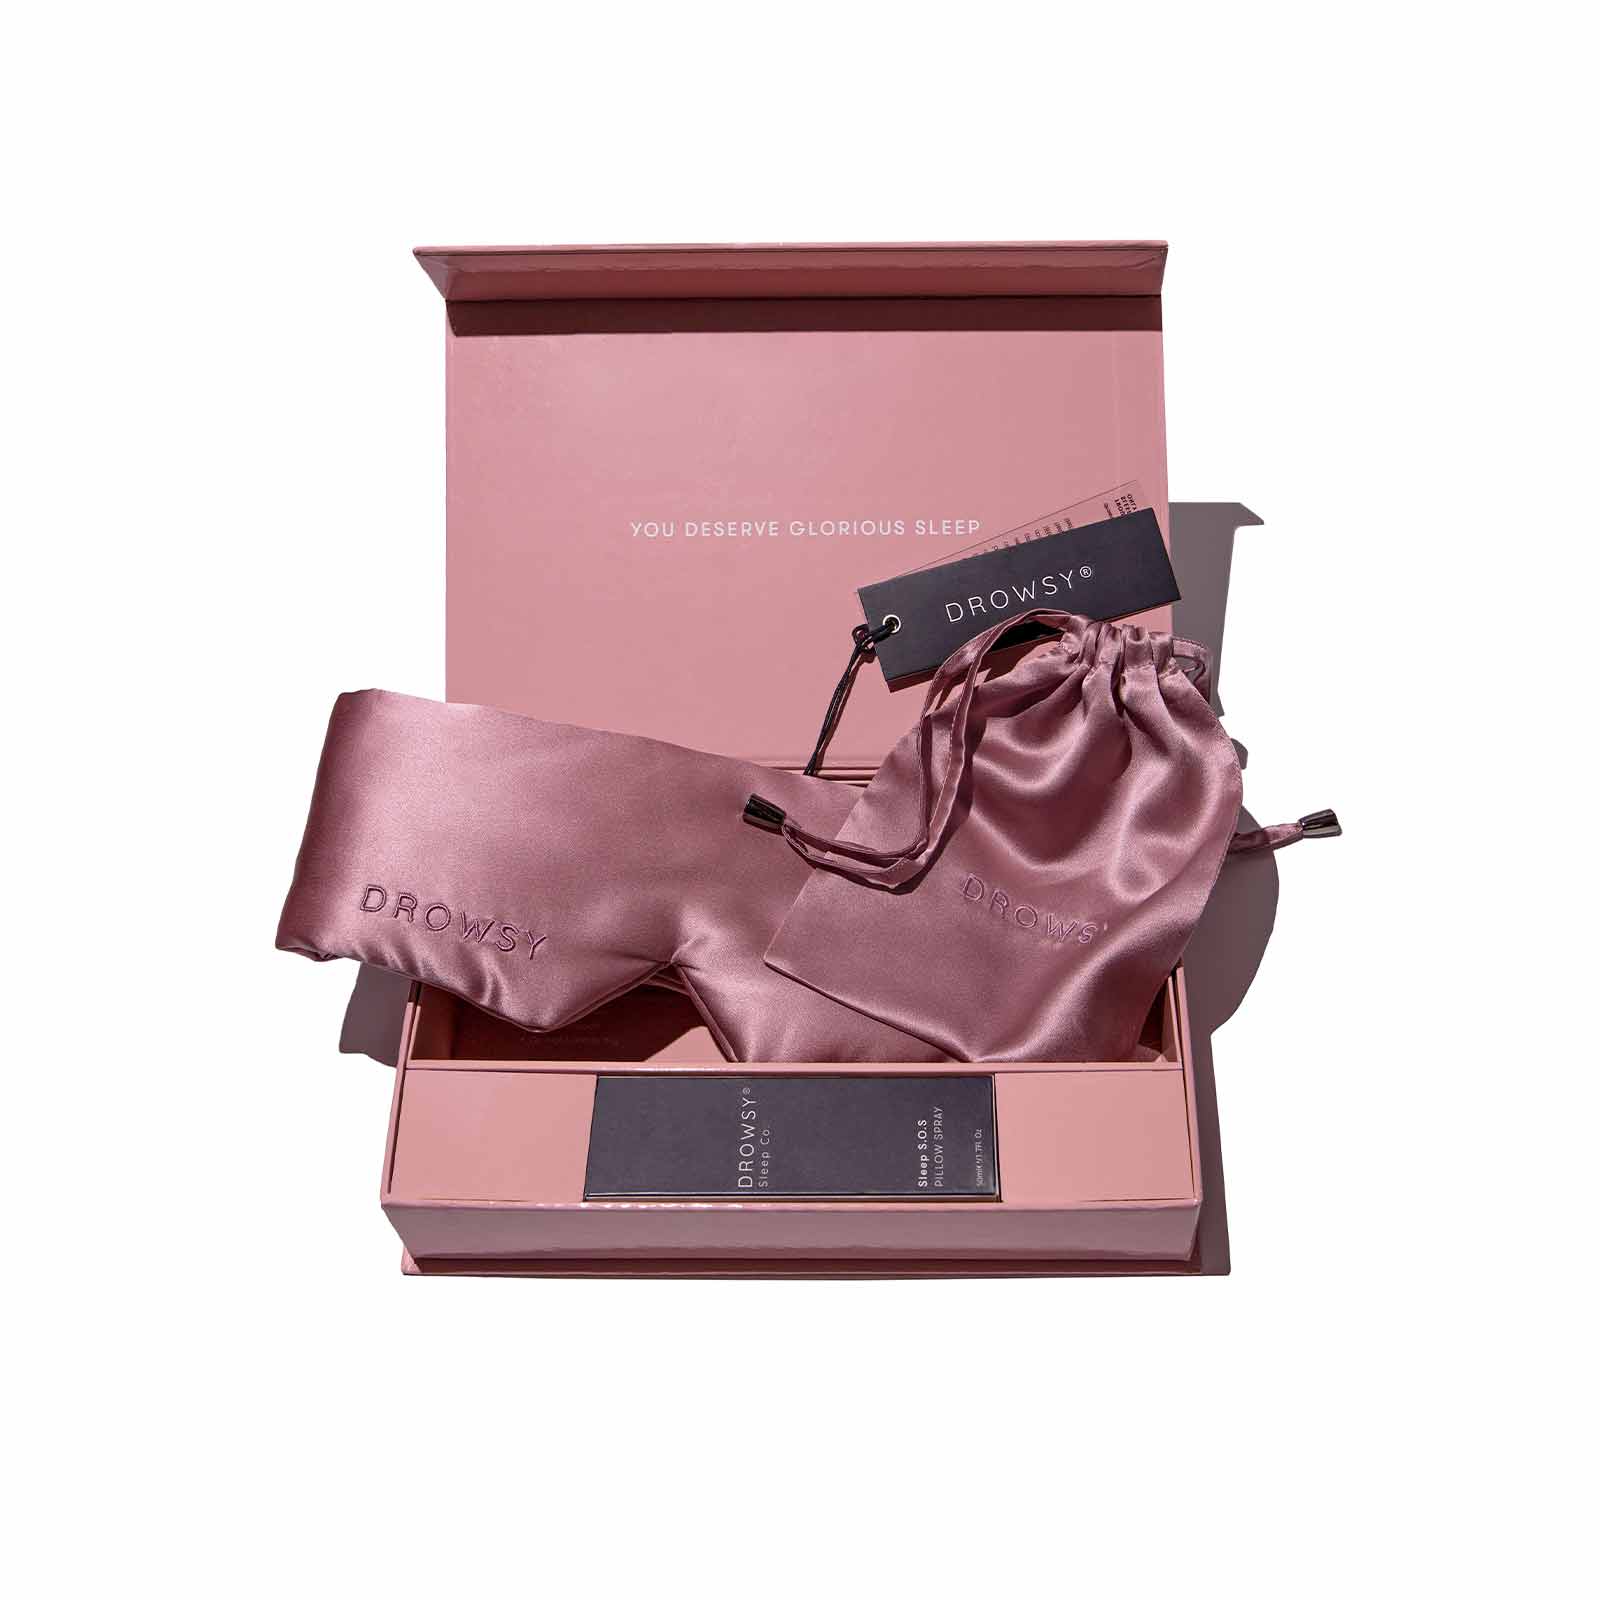 Drowsy Sleep Co. Damask Rose Pink Box Open displaying silk mask and pillow spray inside placed on white background